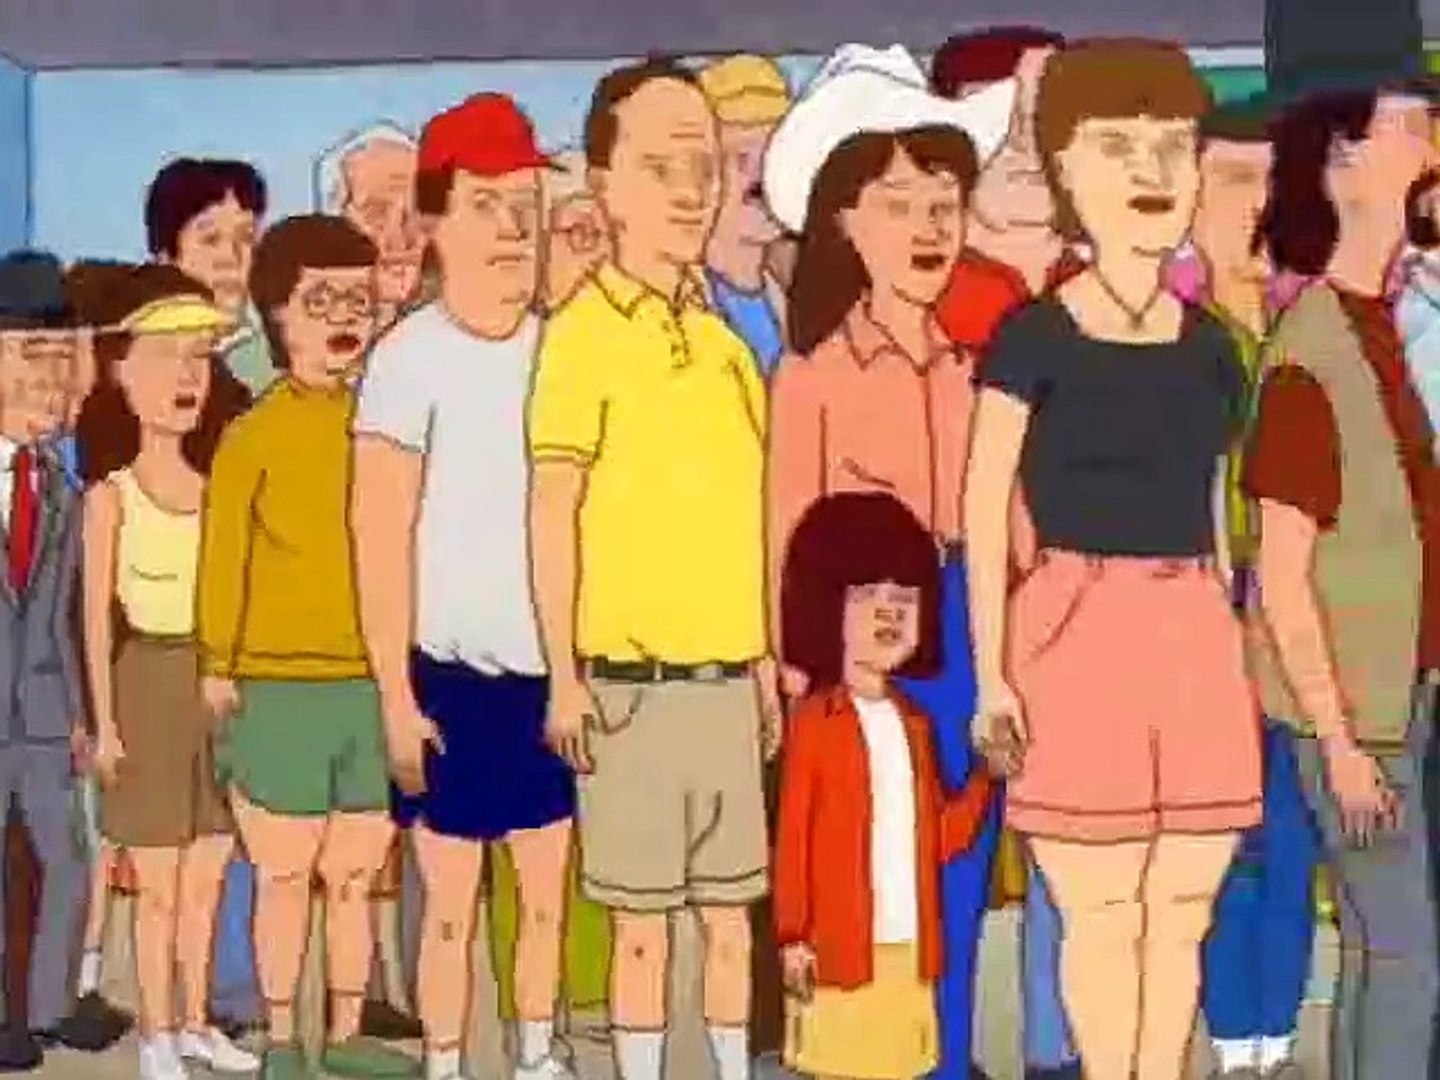 King of the Hill S4 - 13 - Hanky Panky - video Dailymotion